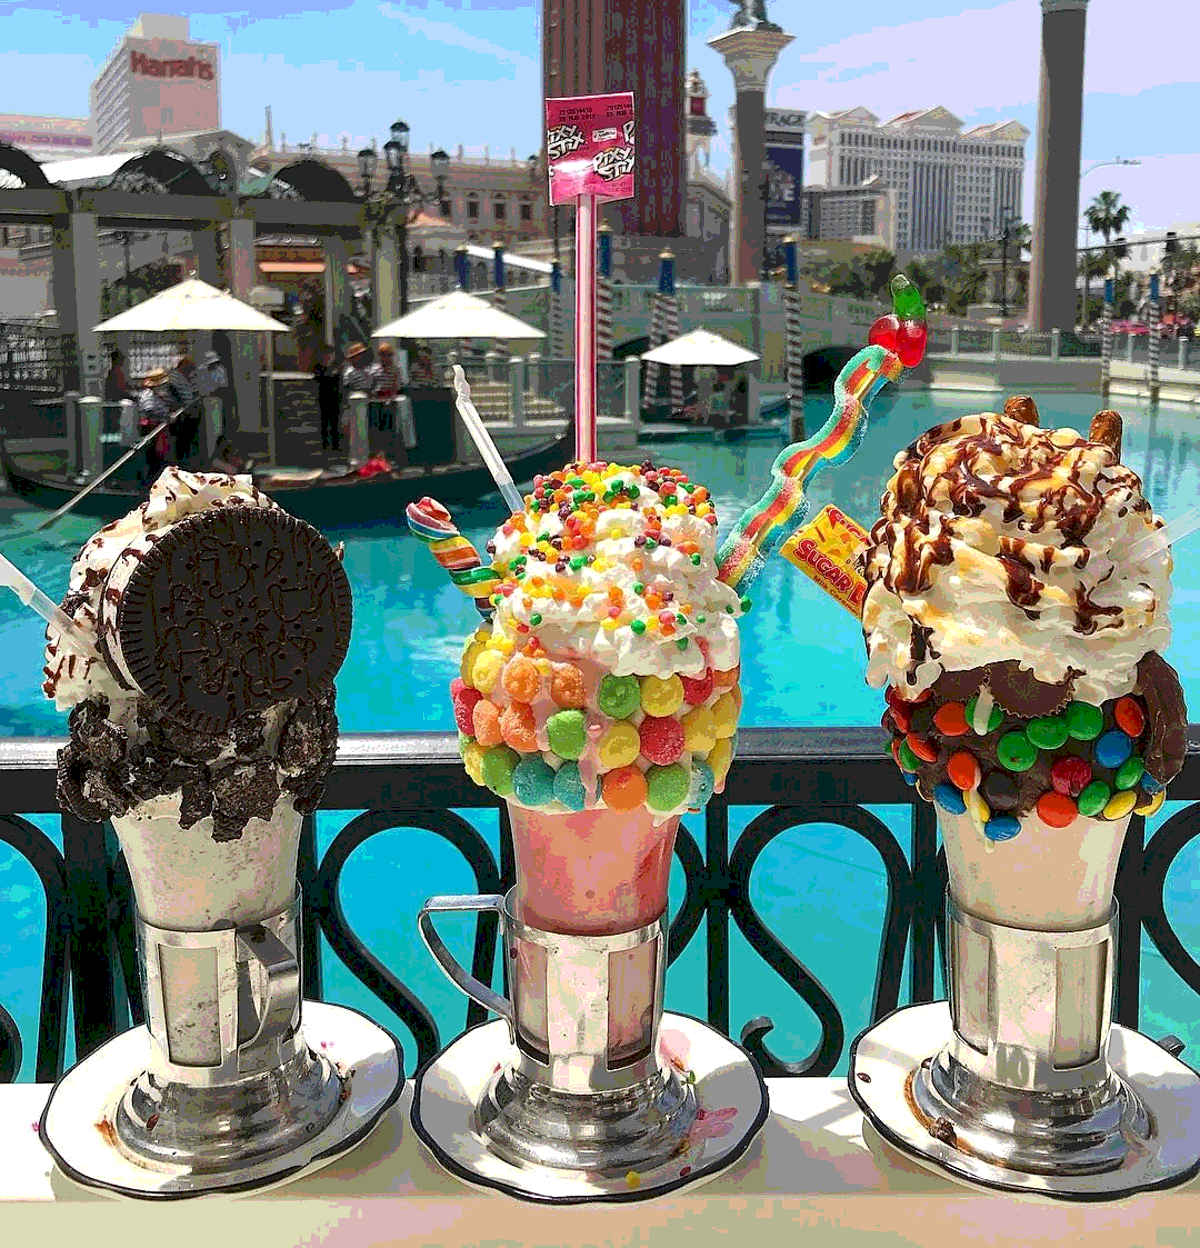 An array of three ornately decorated milkshakes with candy and other edibles